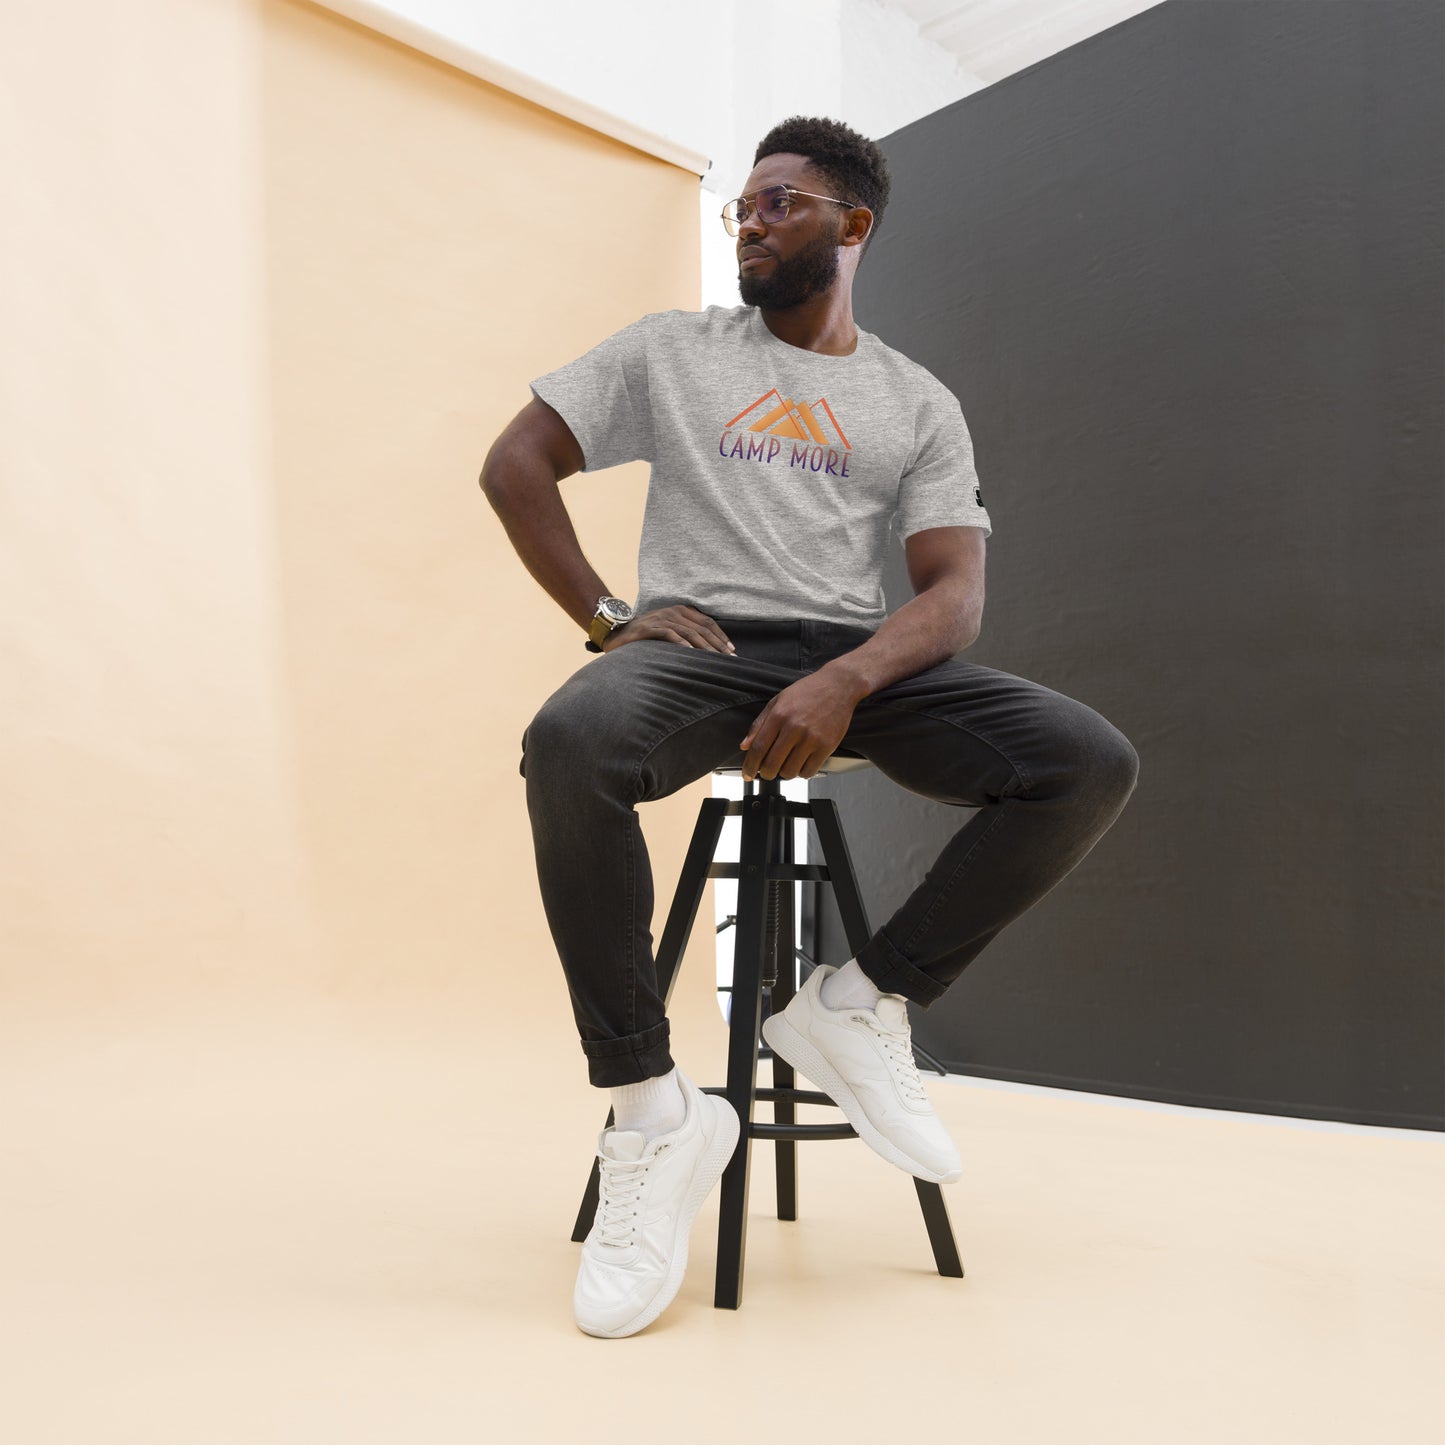 Man with glasses seated casually on a black stool, wearing a heather grey 'CAMP MORE' t-shirt with an orange and an abstract orange mountain design, black jeans, white sneakers, and a wristwatch, in front of a contrasting black and cream backdrop.